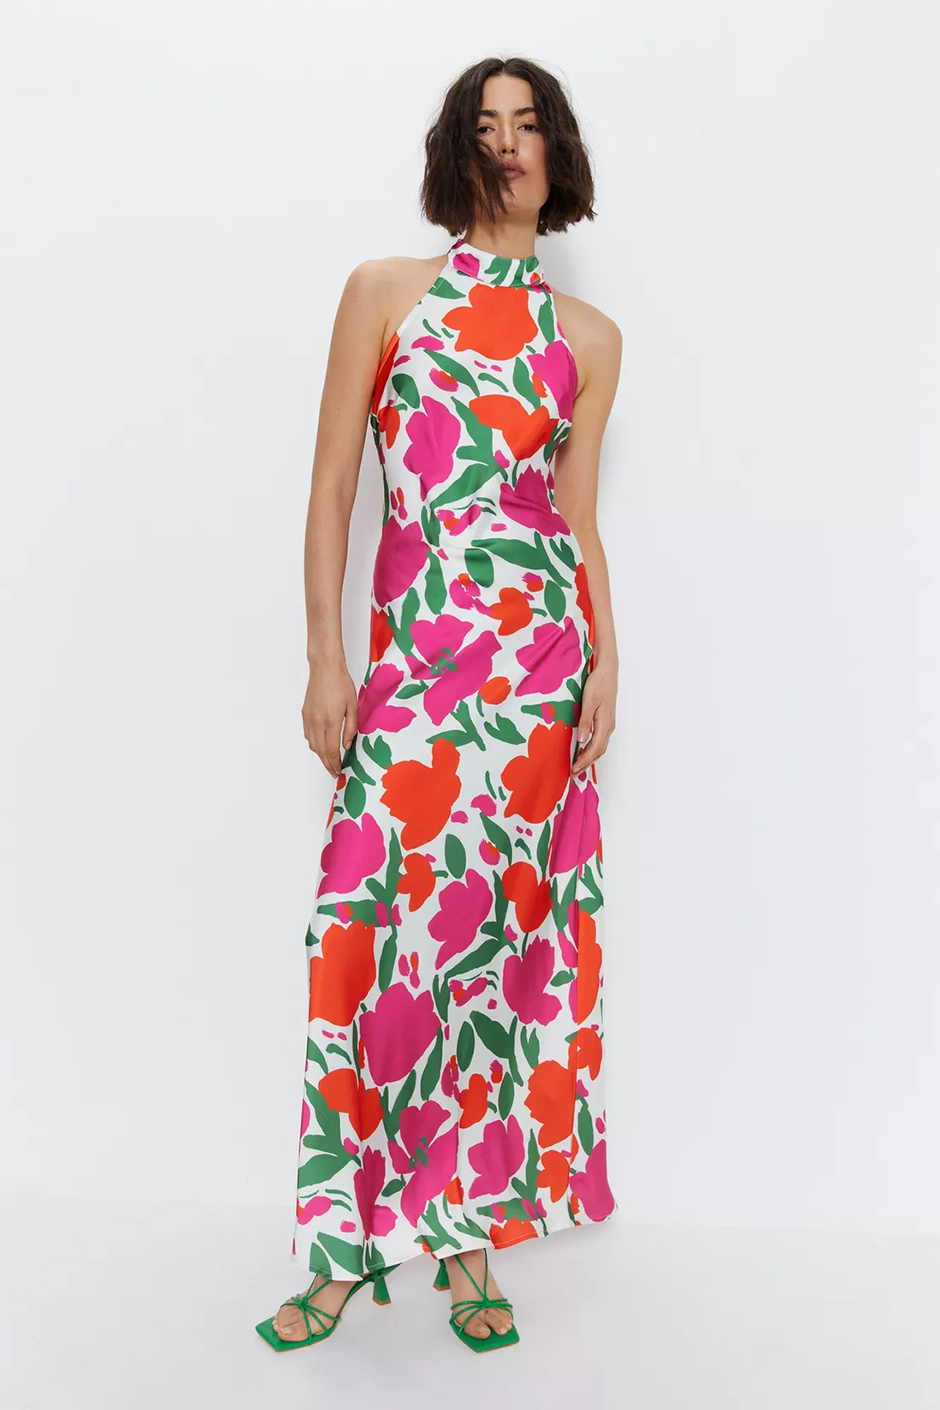 Summer wedding guest dress with white, pink, green and orange floral print